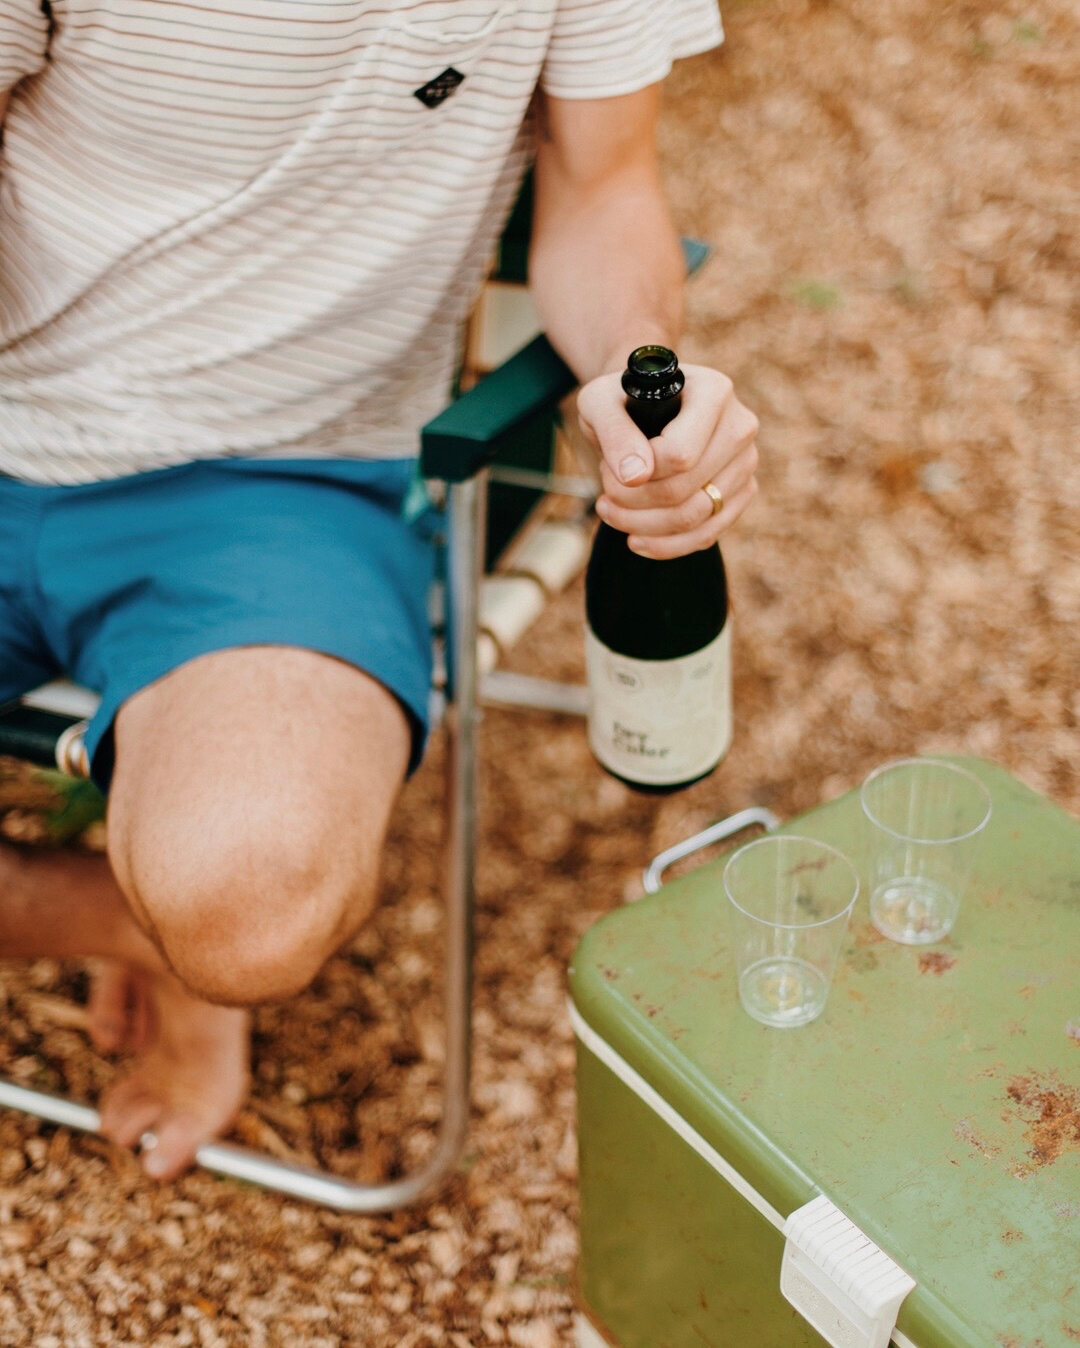 How many more days until this? Barefoot on the campground, drink in hand is exactly the feeling we are holding onto, anxiously awaiting all things summer. ​​​​​​​​​
📸: @carlyscamera